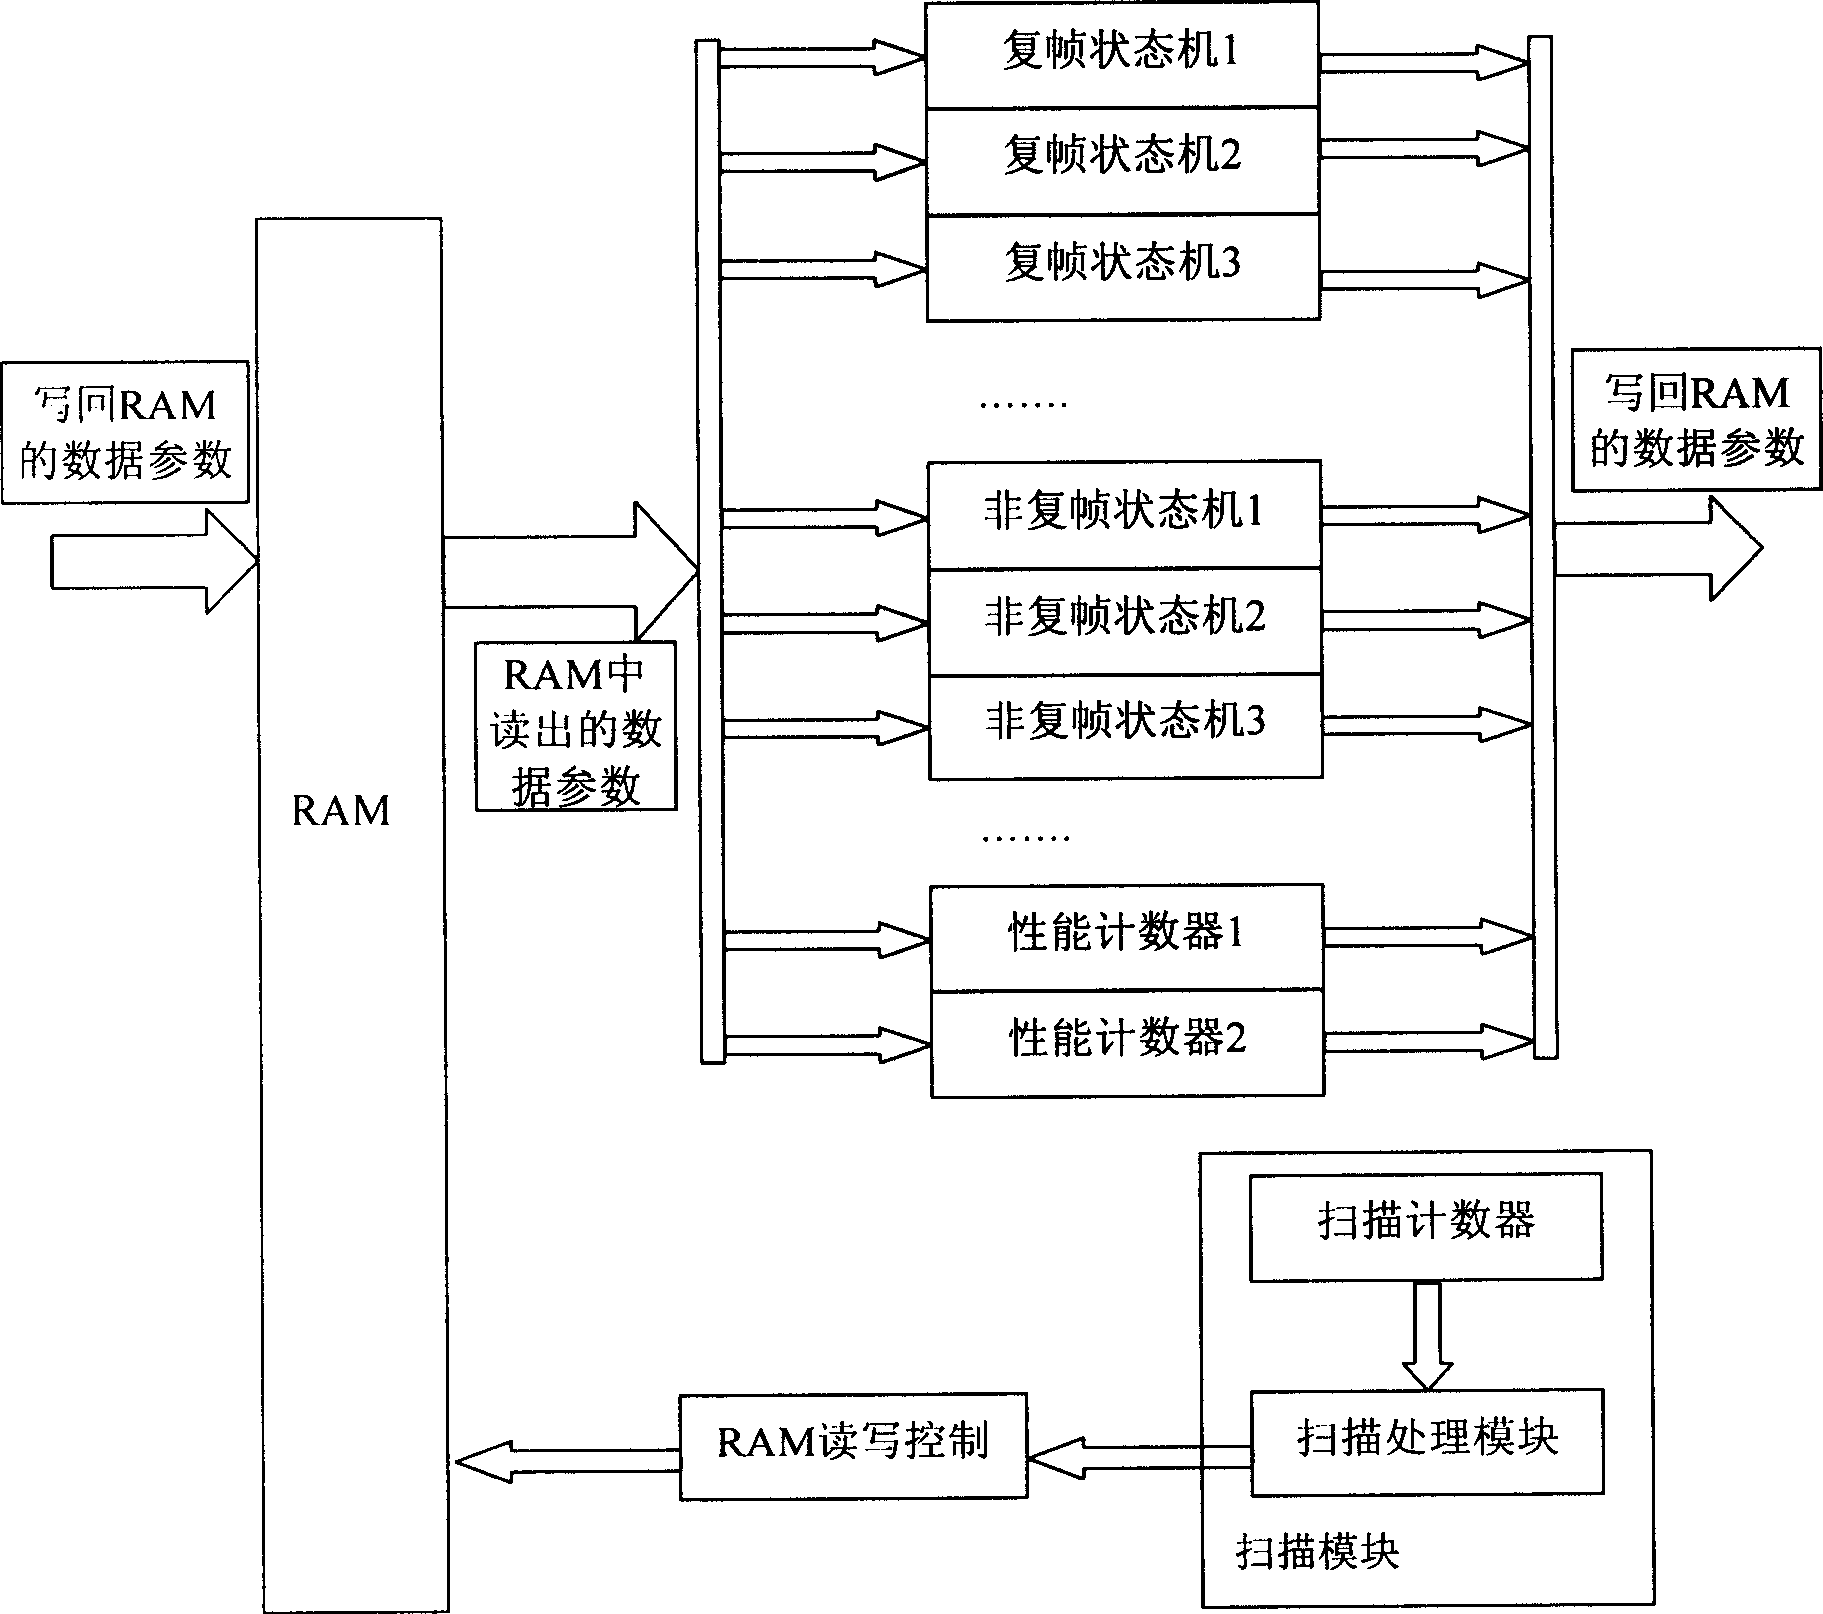 Method of realizing series monitoring terminal treatment in network communication and its device